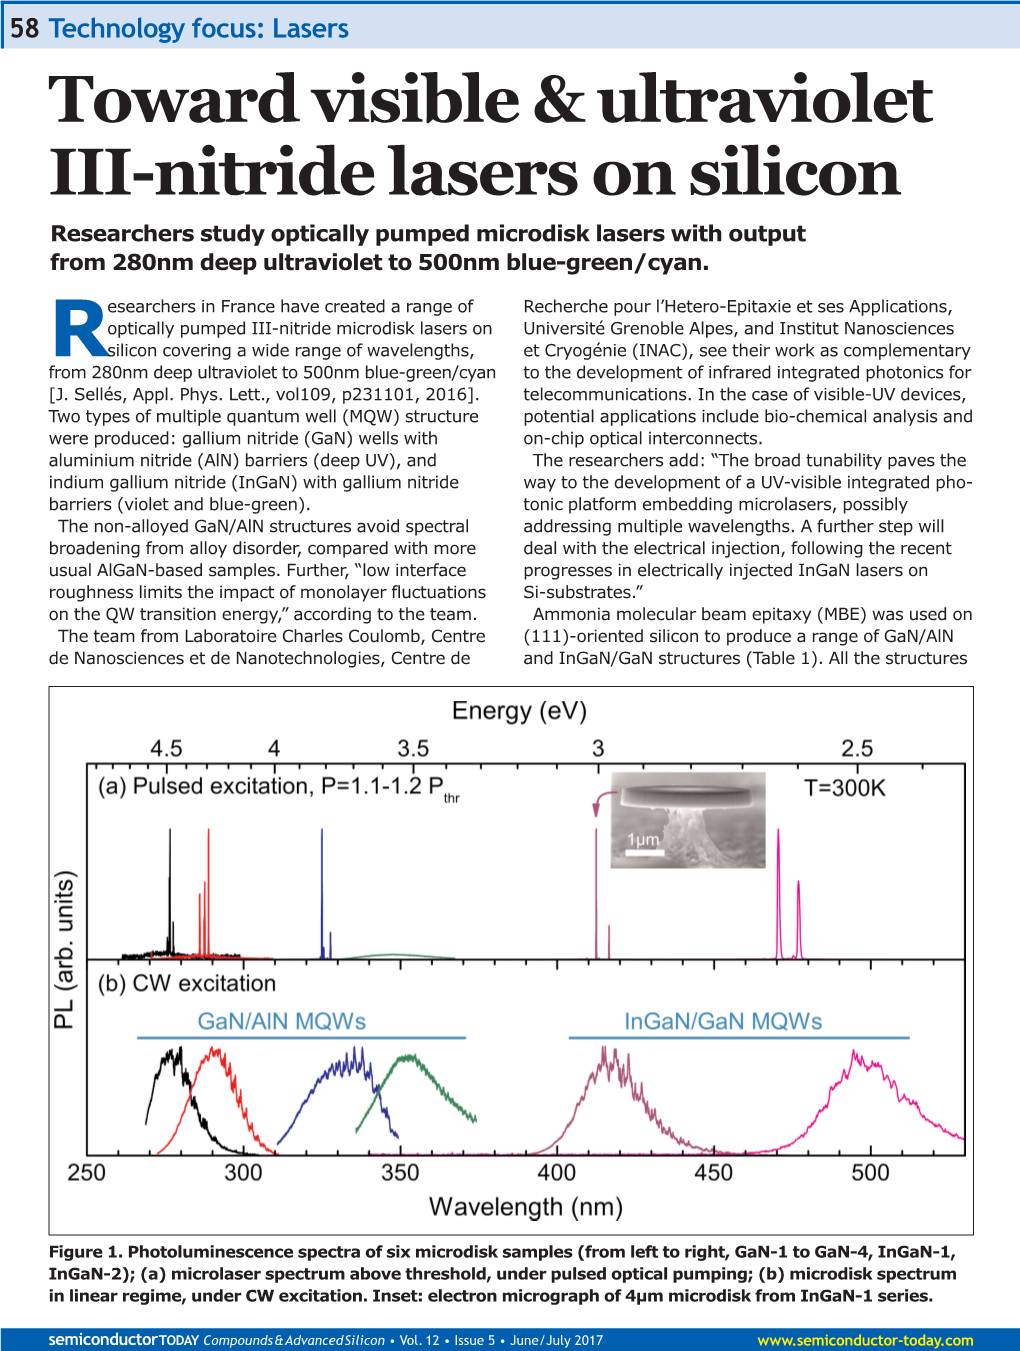 Toward Visible & Ultraviolet III-Nitride Lasers on Silicon